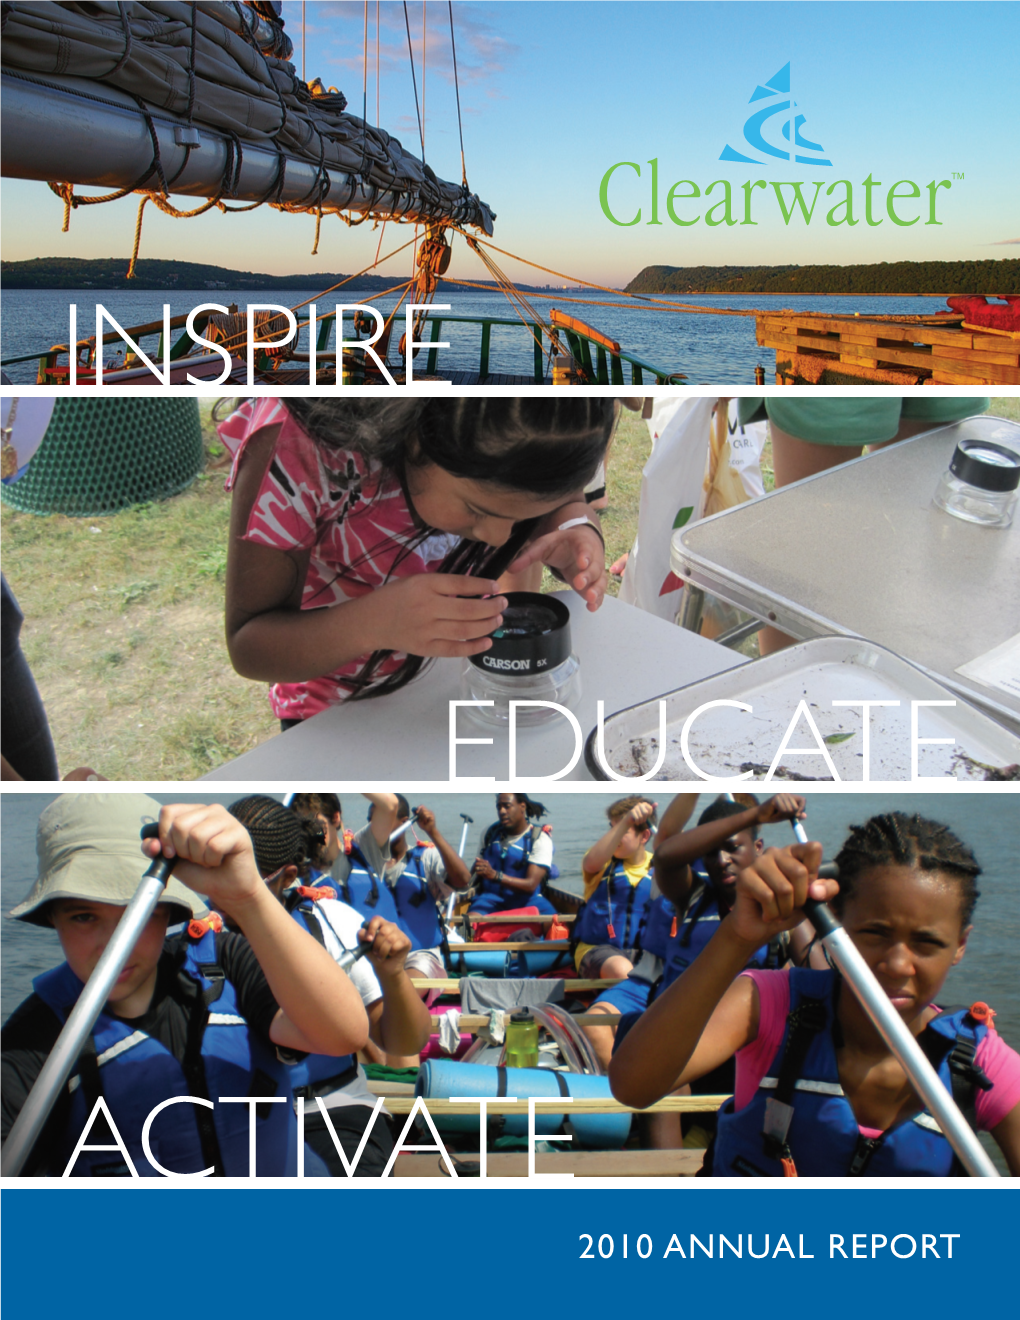 Clearwater's 2010 Annual Report